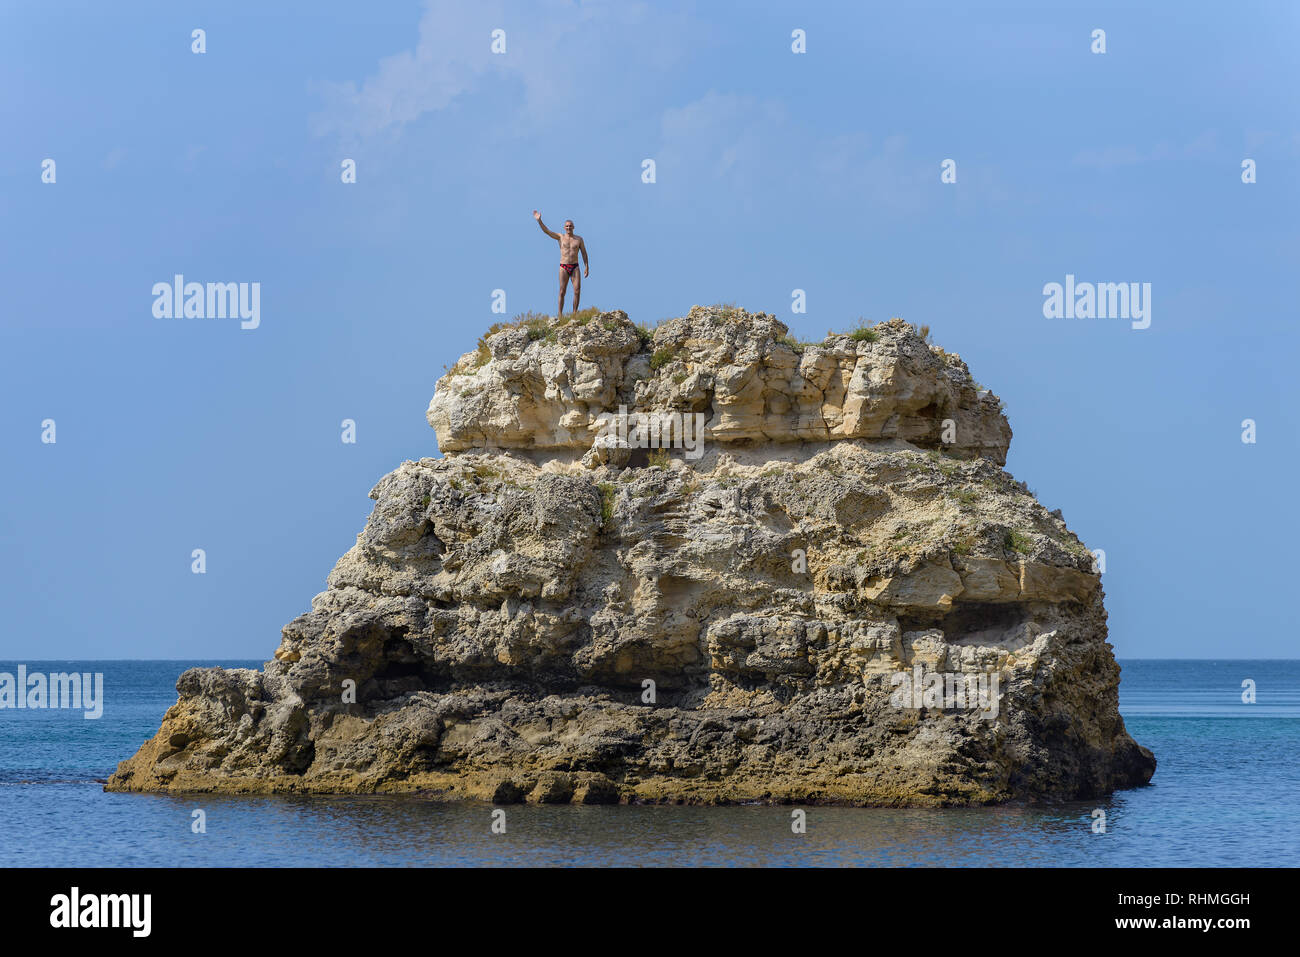 A man in a red swimming trunks stands on top of a cliff Stock Photo